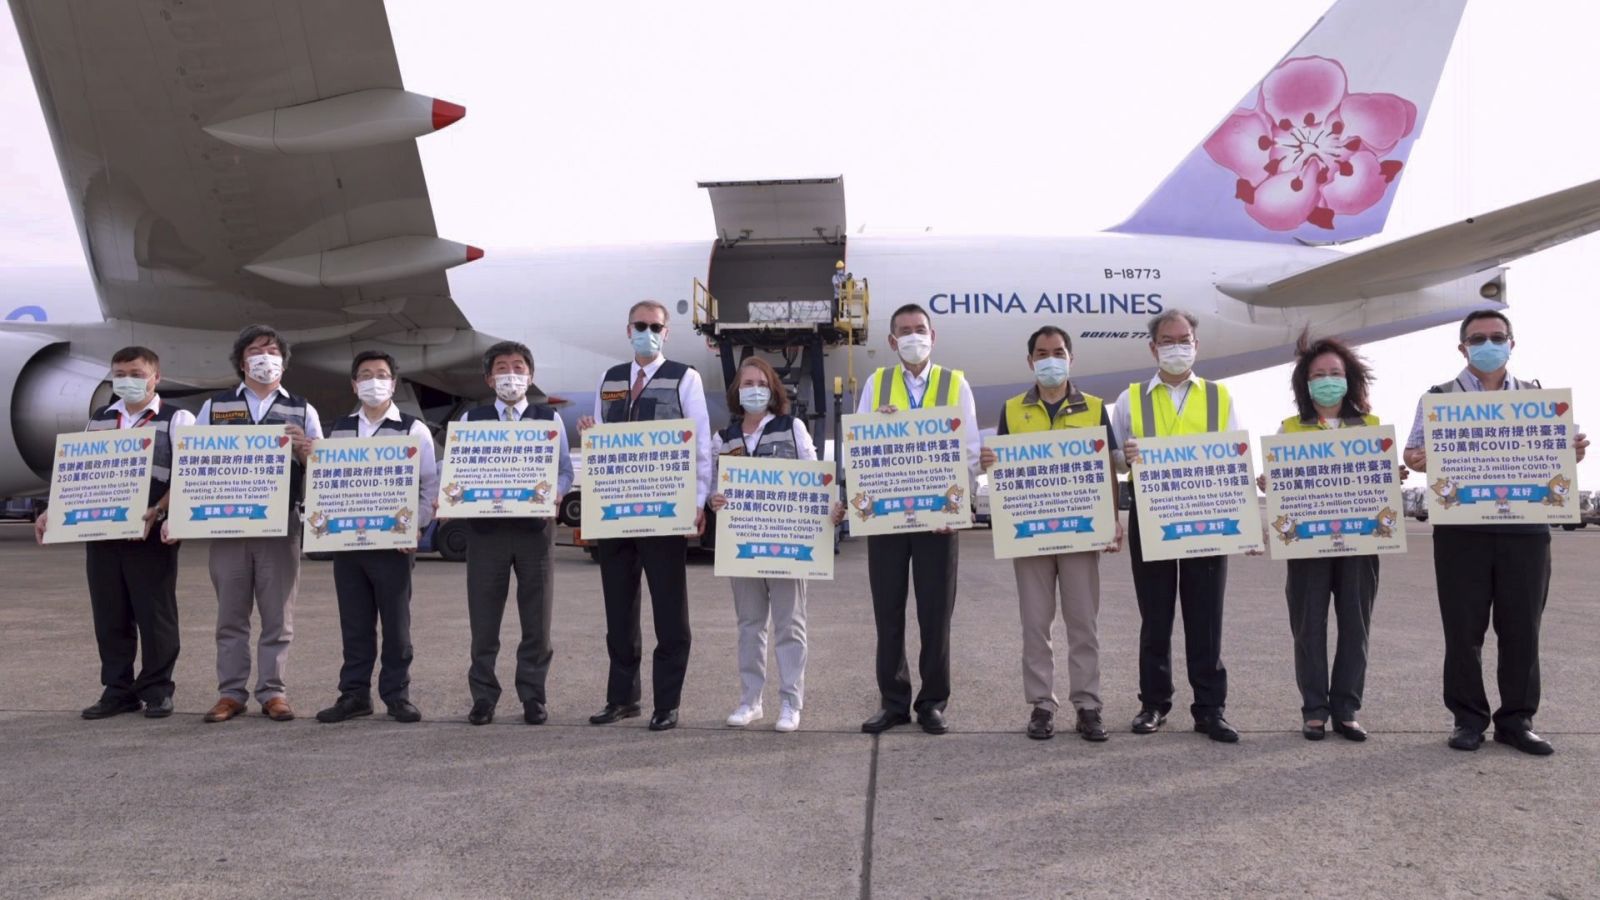 epa09287832 A handout photo made available by Taiwan Centers for Disease Control shows Taiwan Health Minister Chen Shih-chung(4R),  American Institute in Taiwan (AIT) Director Brent Christensen(5R) and Taiwanese officials posing for photograph next to airport workers unloading from a cargo plane boxes of Moderna Covid-19 vaccine from the US, in Taoyuan International airport, Taiwan, 20 June 2021. Taiwan received 2.5 million doses of Moderna Covid-19 vaccine donated by the United States government. Taiwan President Tsai Ing-wen thanked the US Government for the donation.  EPA/TAIWAN CDC HANDOUT  HANDOUT EDITORIAL USE ONLY/NO SALES HANDOUT EDITORIAL USE ONLY/NO SALES